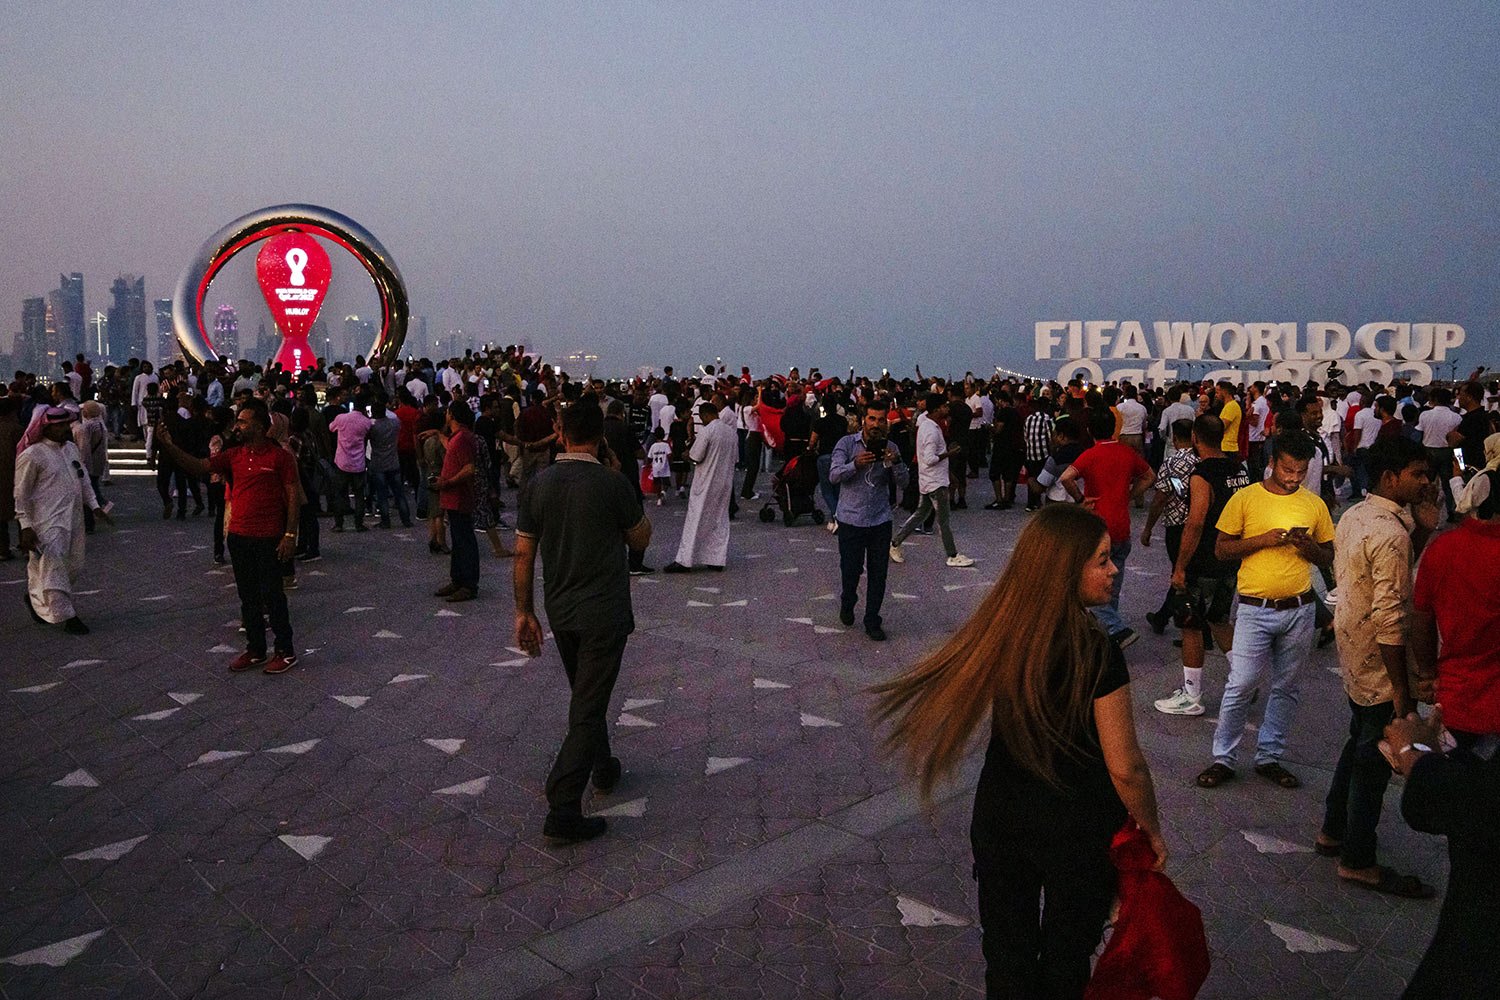  People take photographs in front of the official FIFA World Cup Countdown Clock on Doha's corniche, in Qatar, Friday, Oct. 21, 2022. (AP Photo/Nariman El-Mofty) 